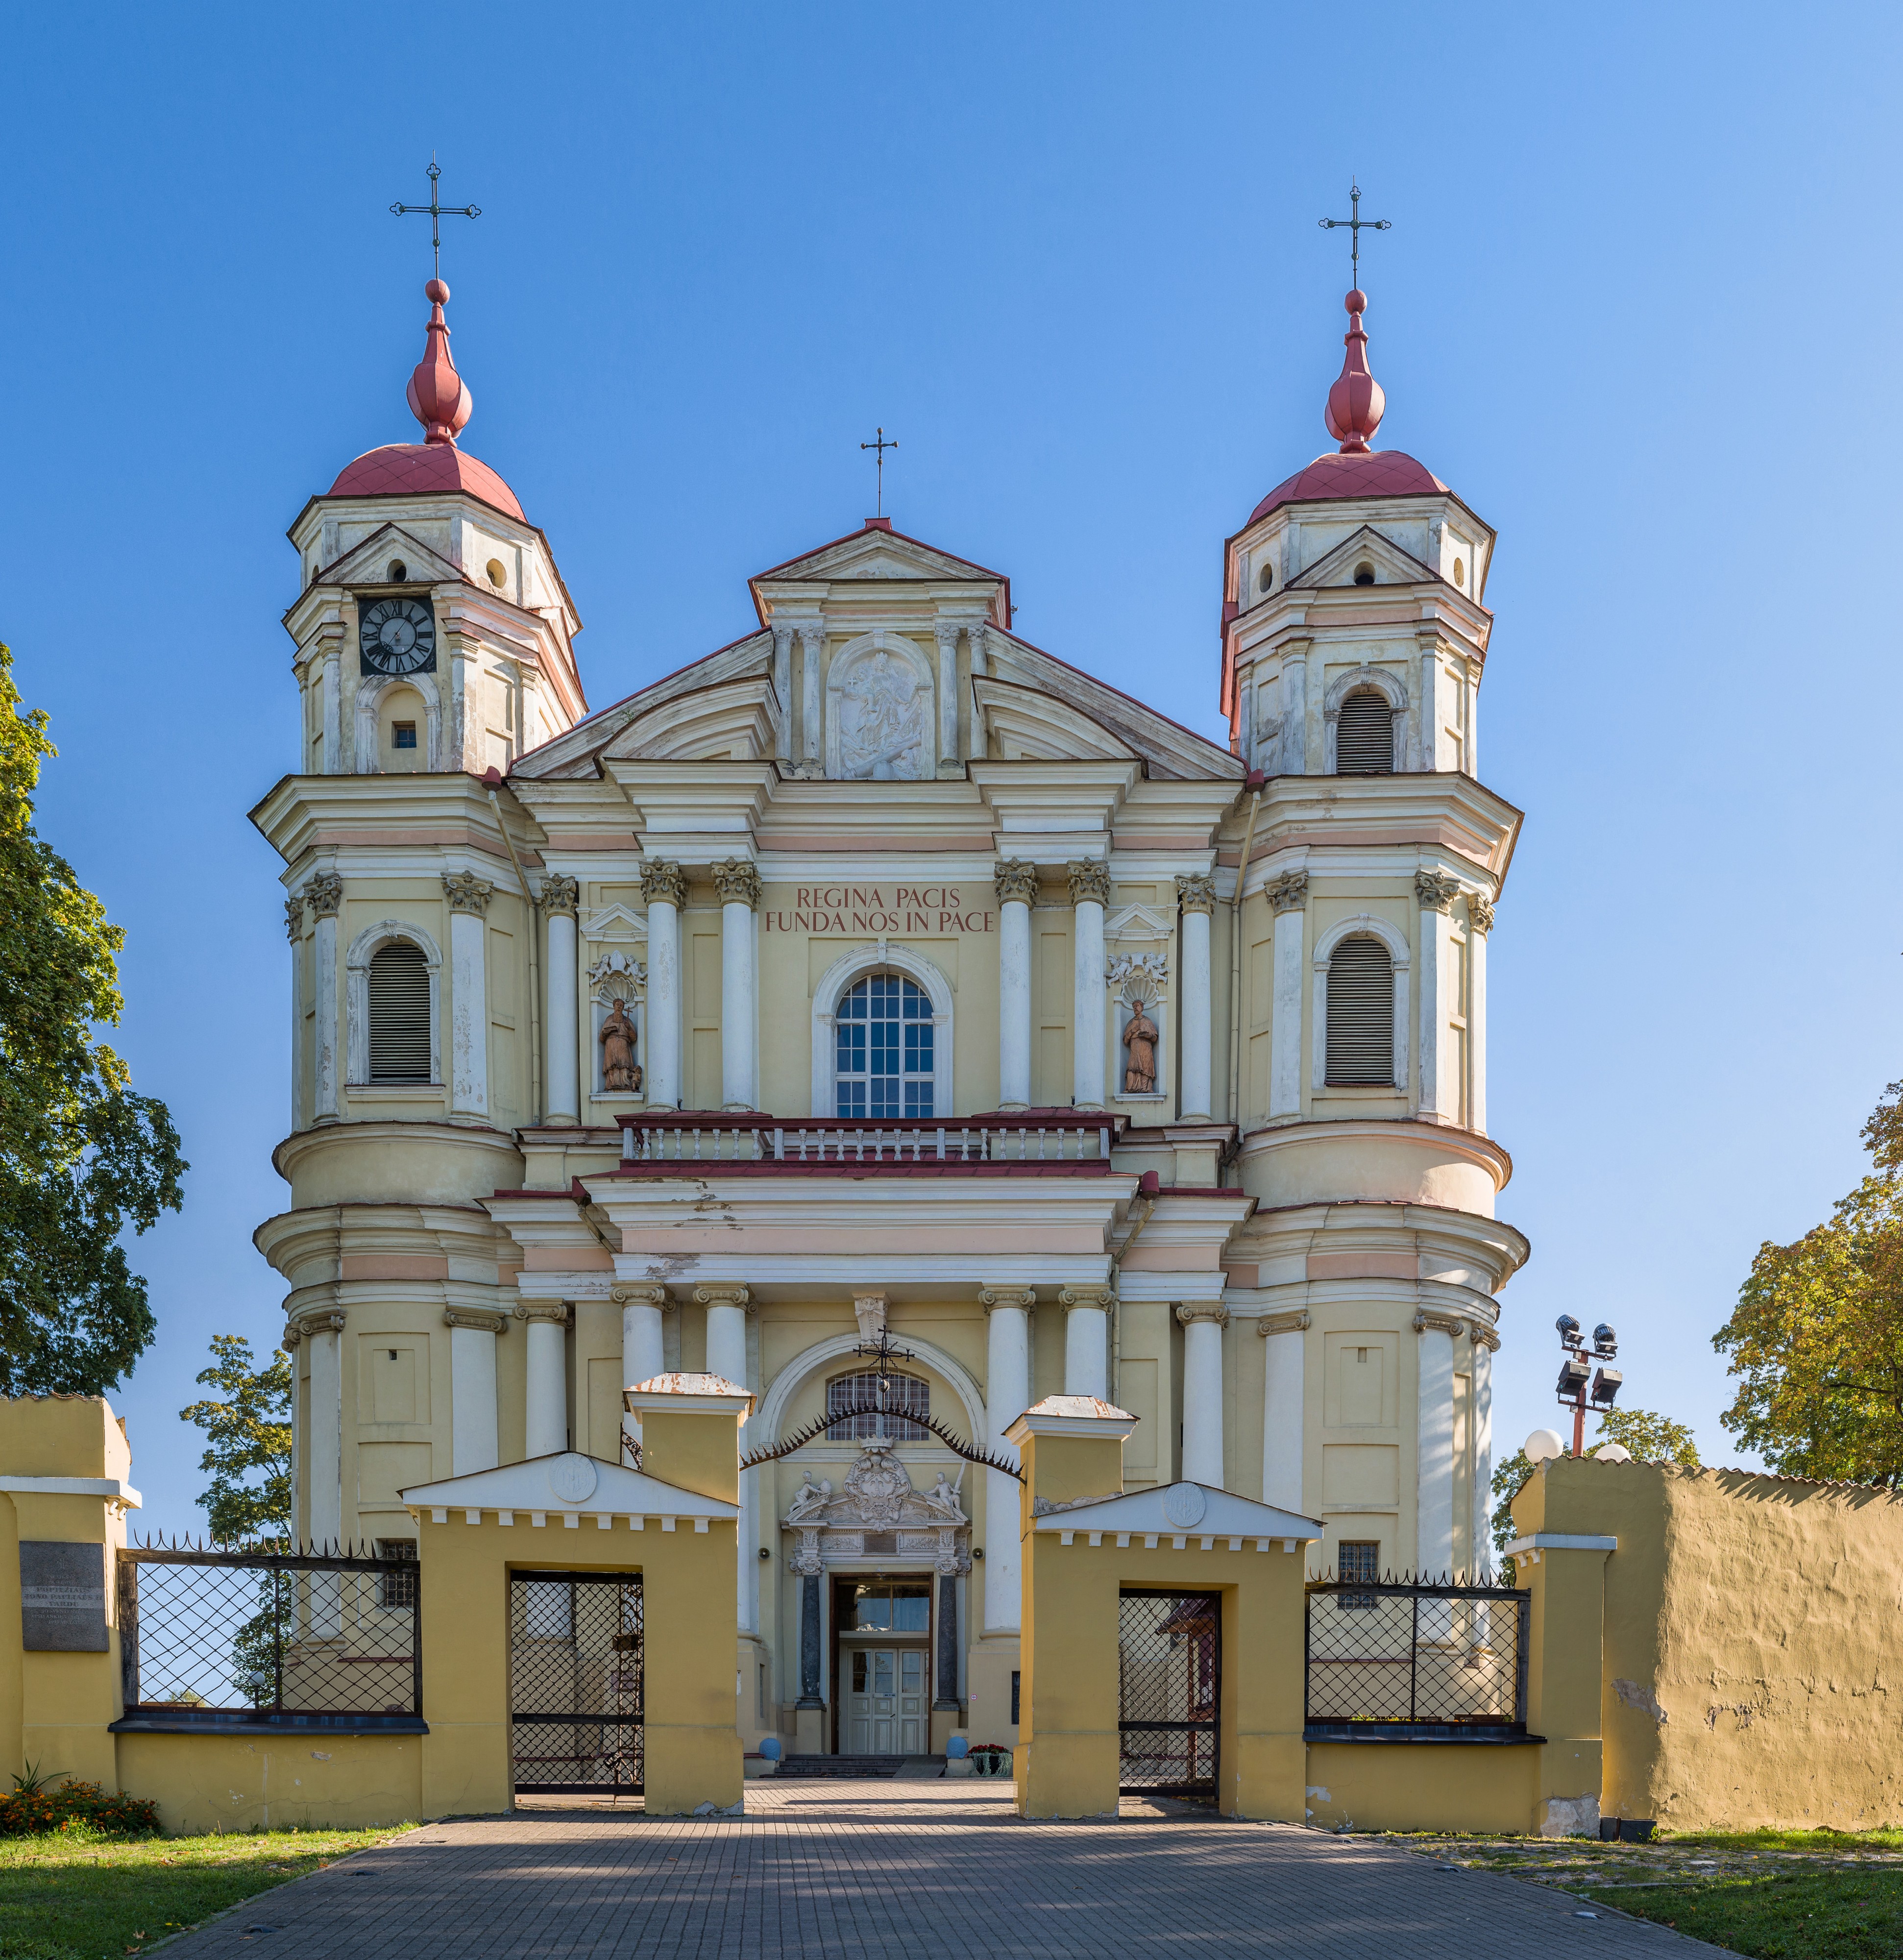 St. Peter and St. Paul's Church Exterior, Vilnius, Lithuania - Diliff